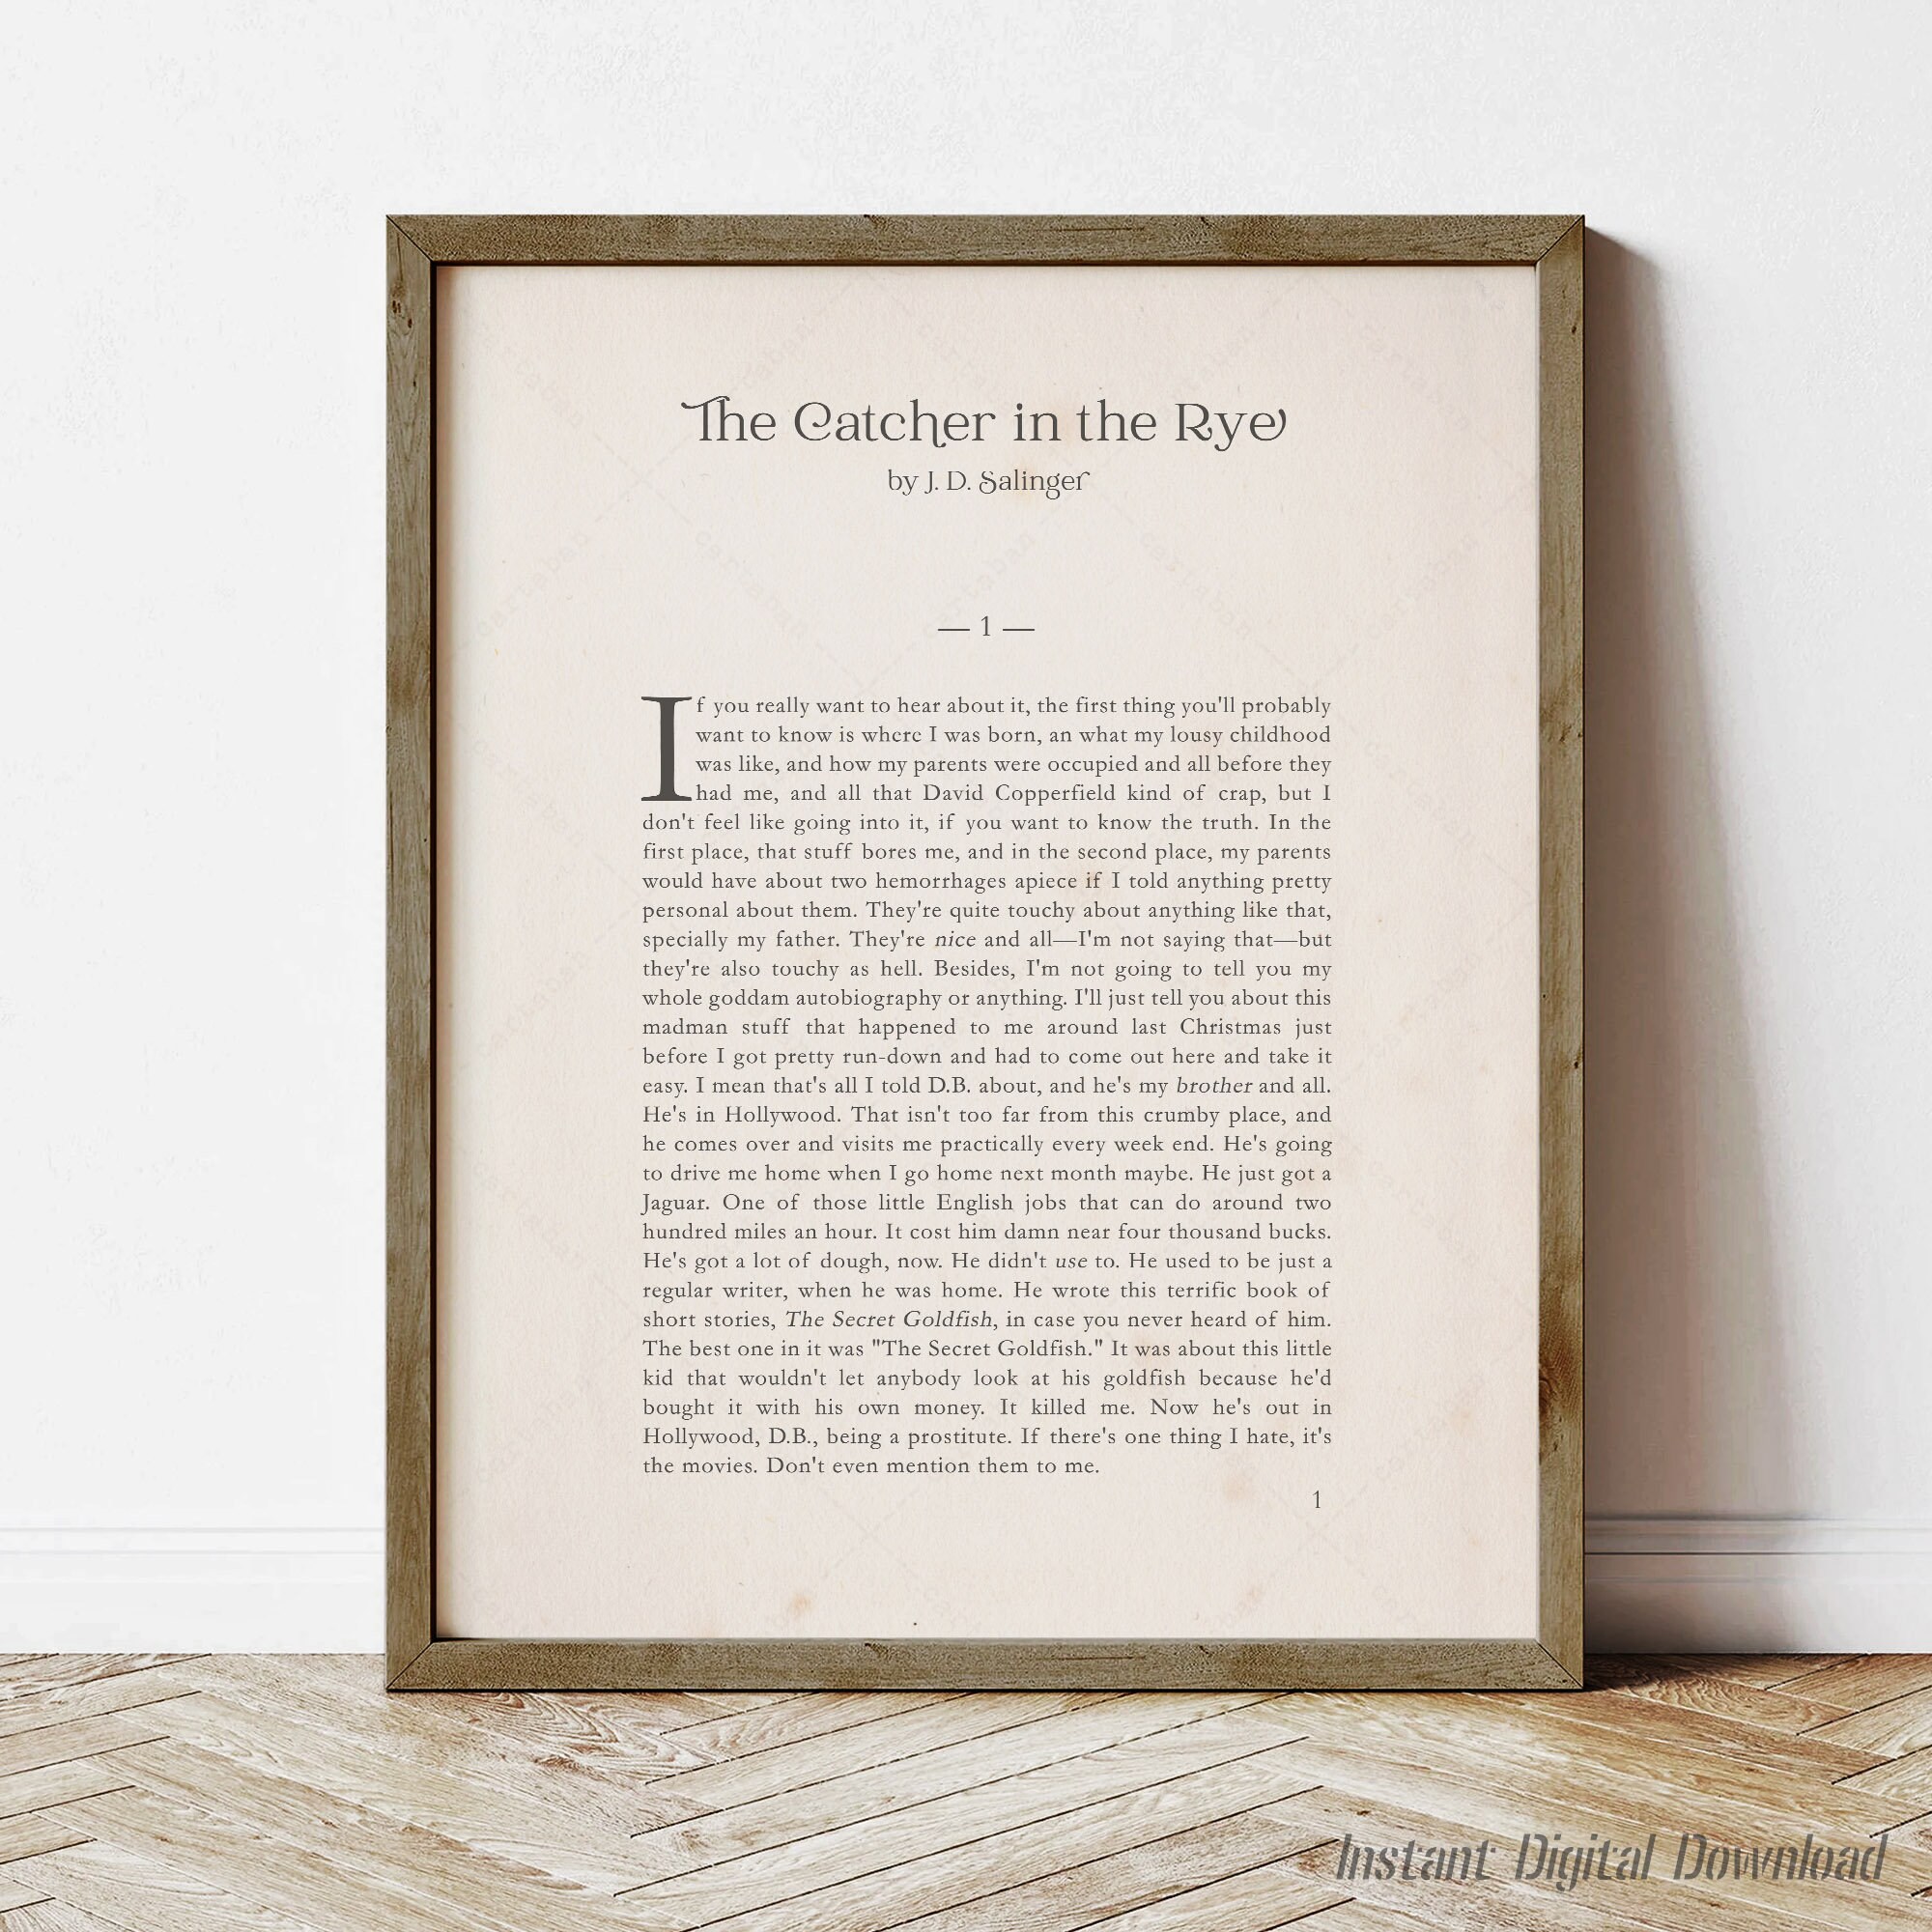 SALINGER : L'attrape-coeurs [The Catcher in the Rye] - First edition 